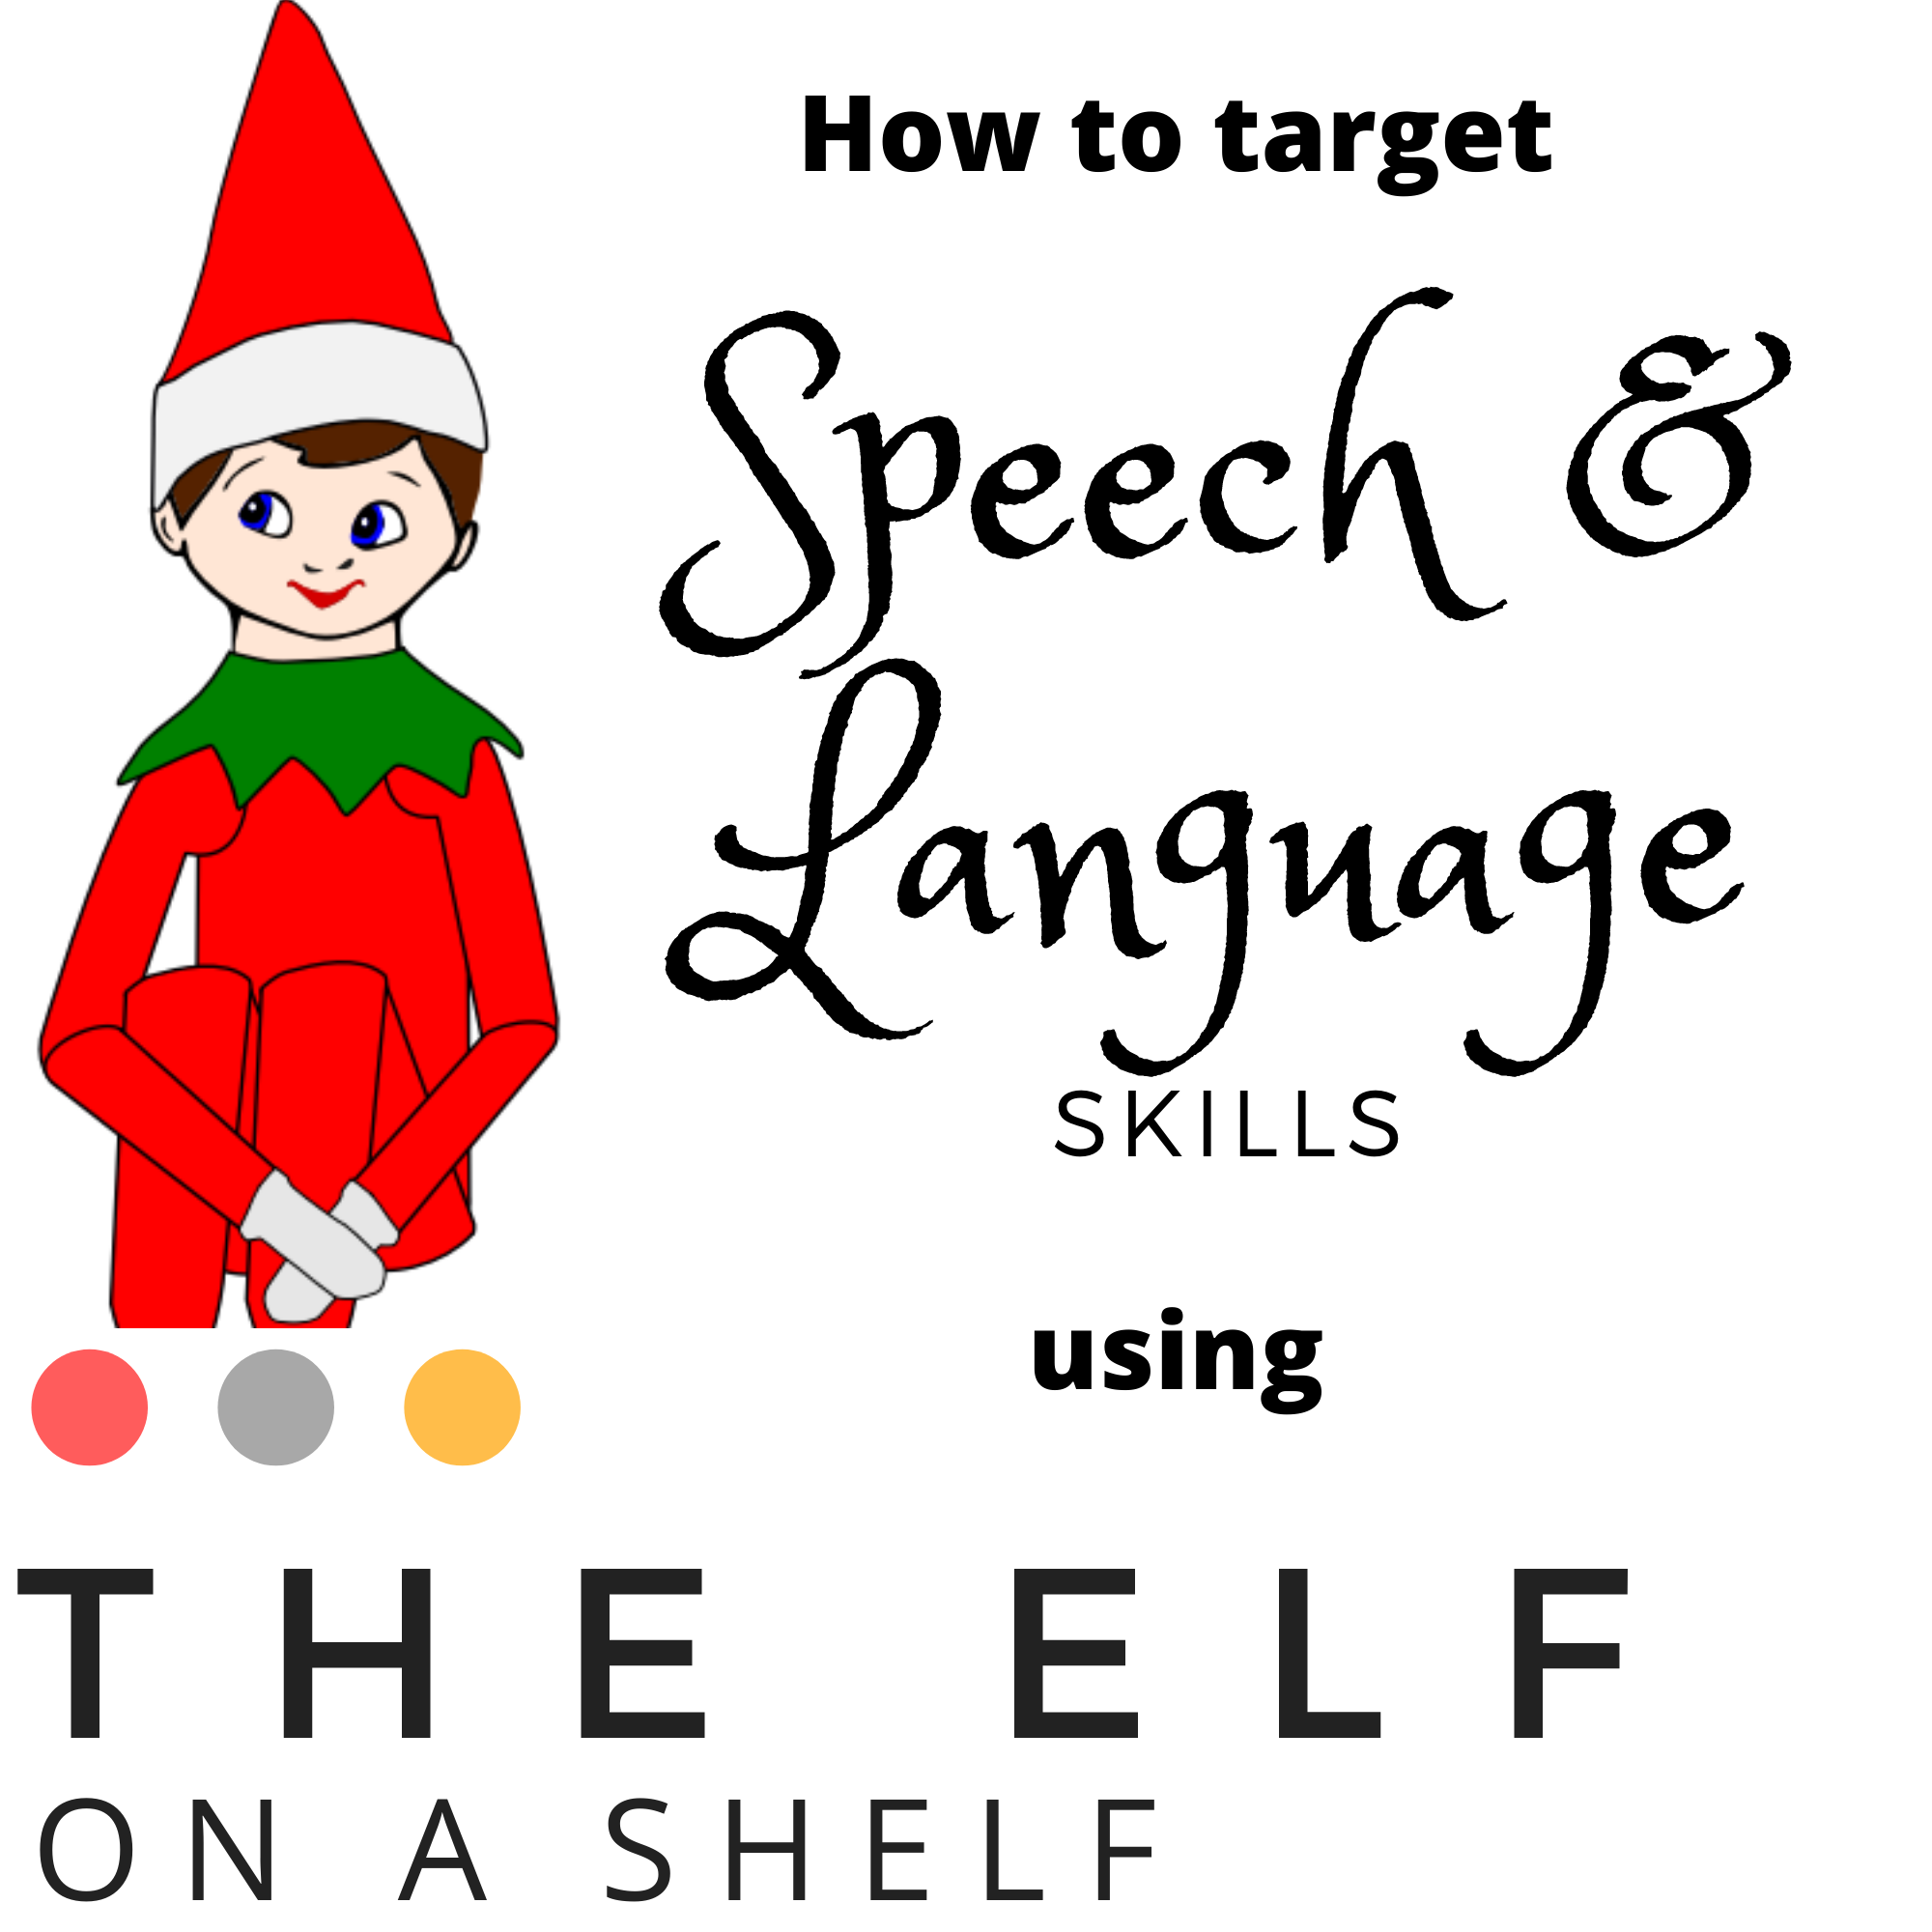 How to Target Speech and Language Skills using the Elf on a Shelf